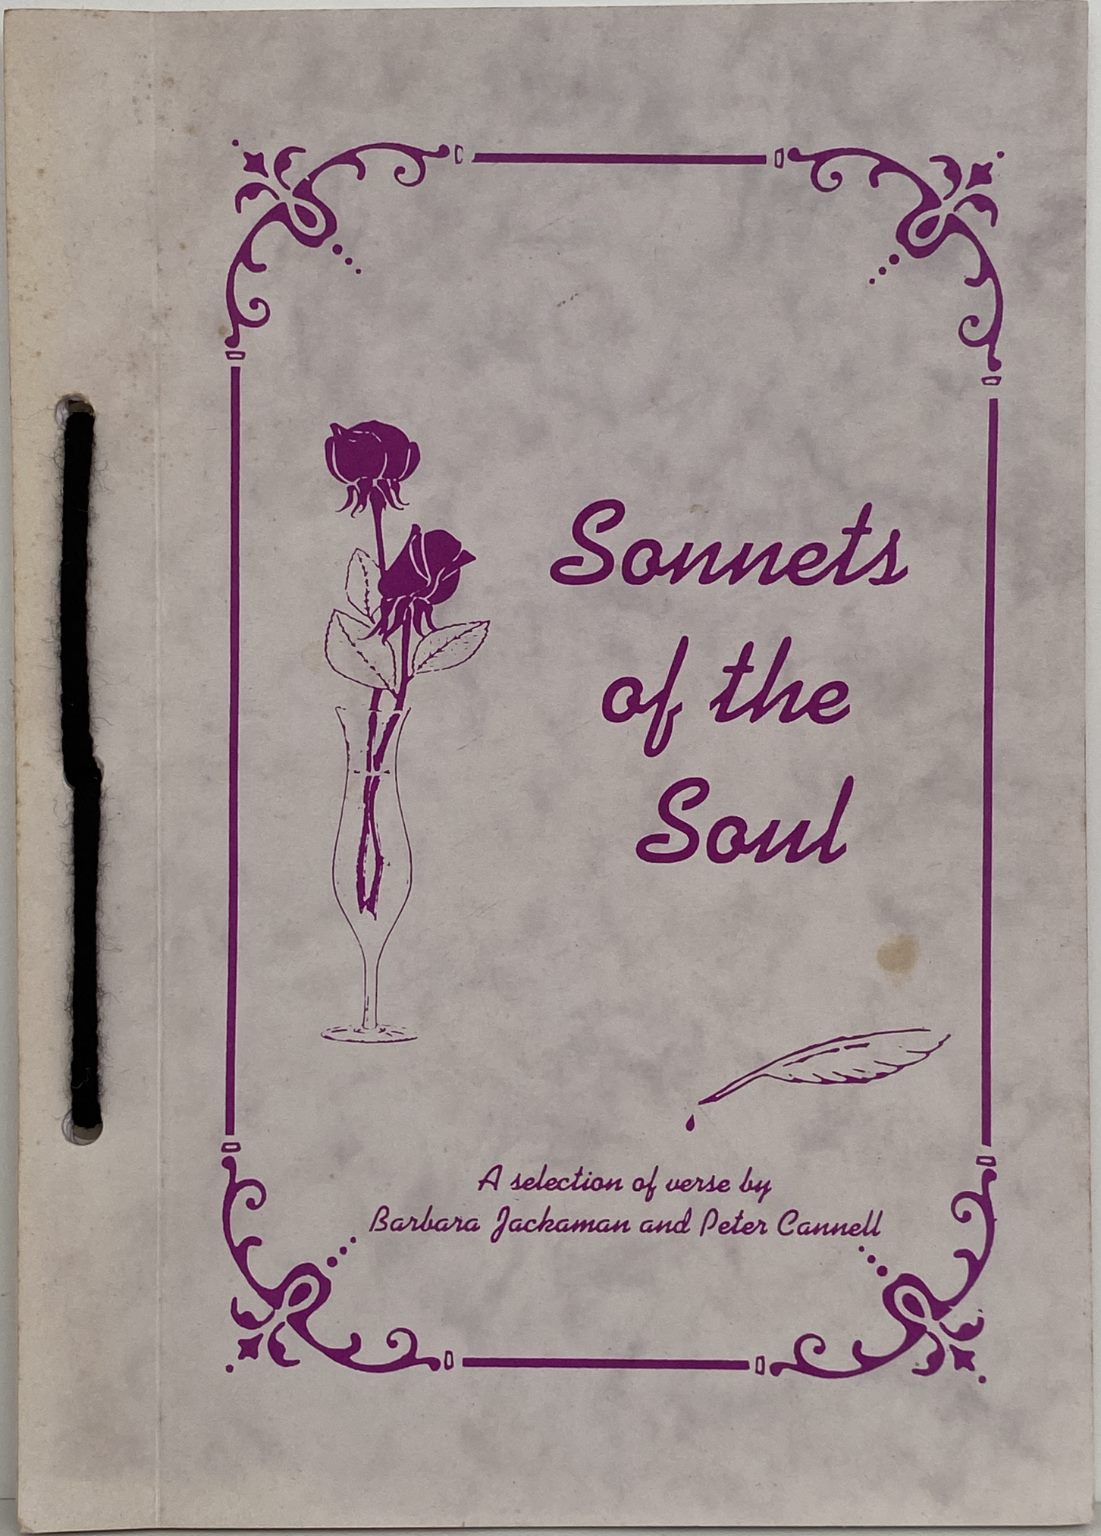 SONNETS OF THE SOUL